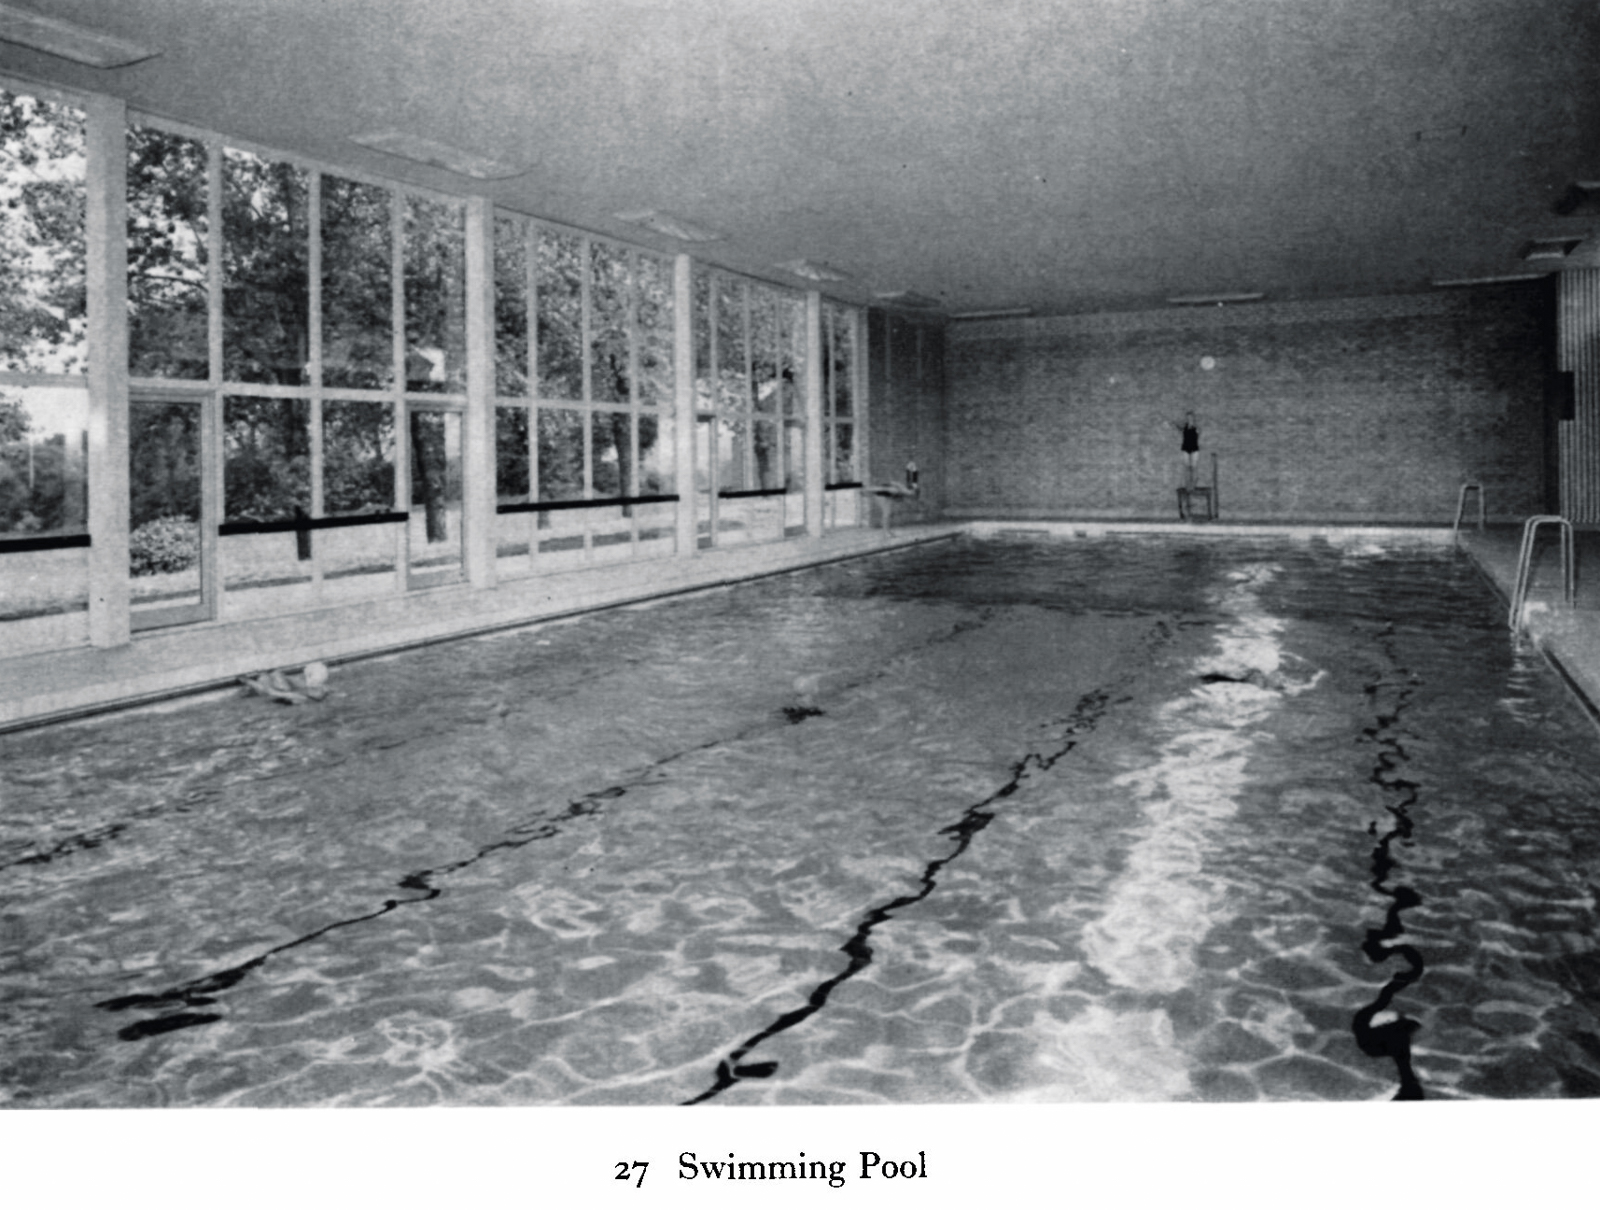 a black and white photo of the Swimming pool interior